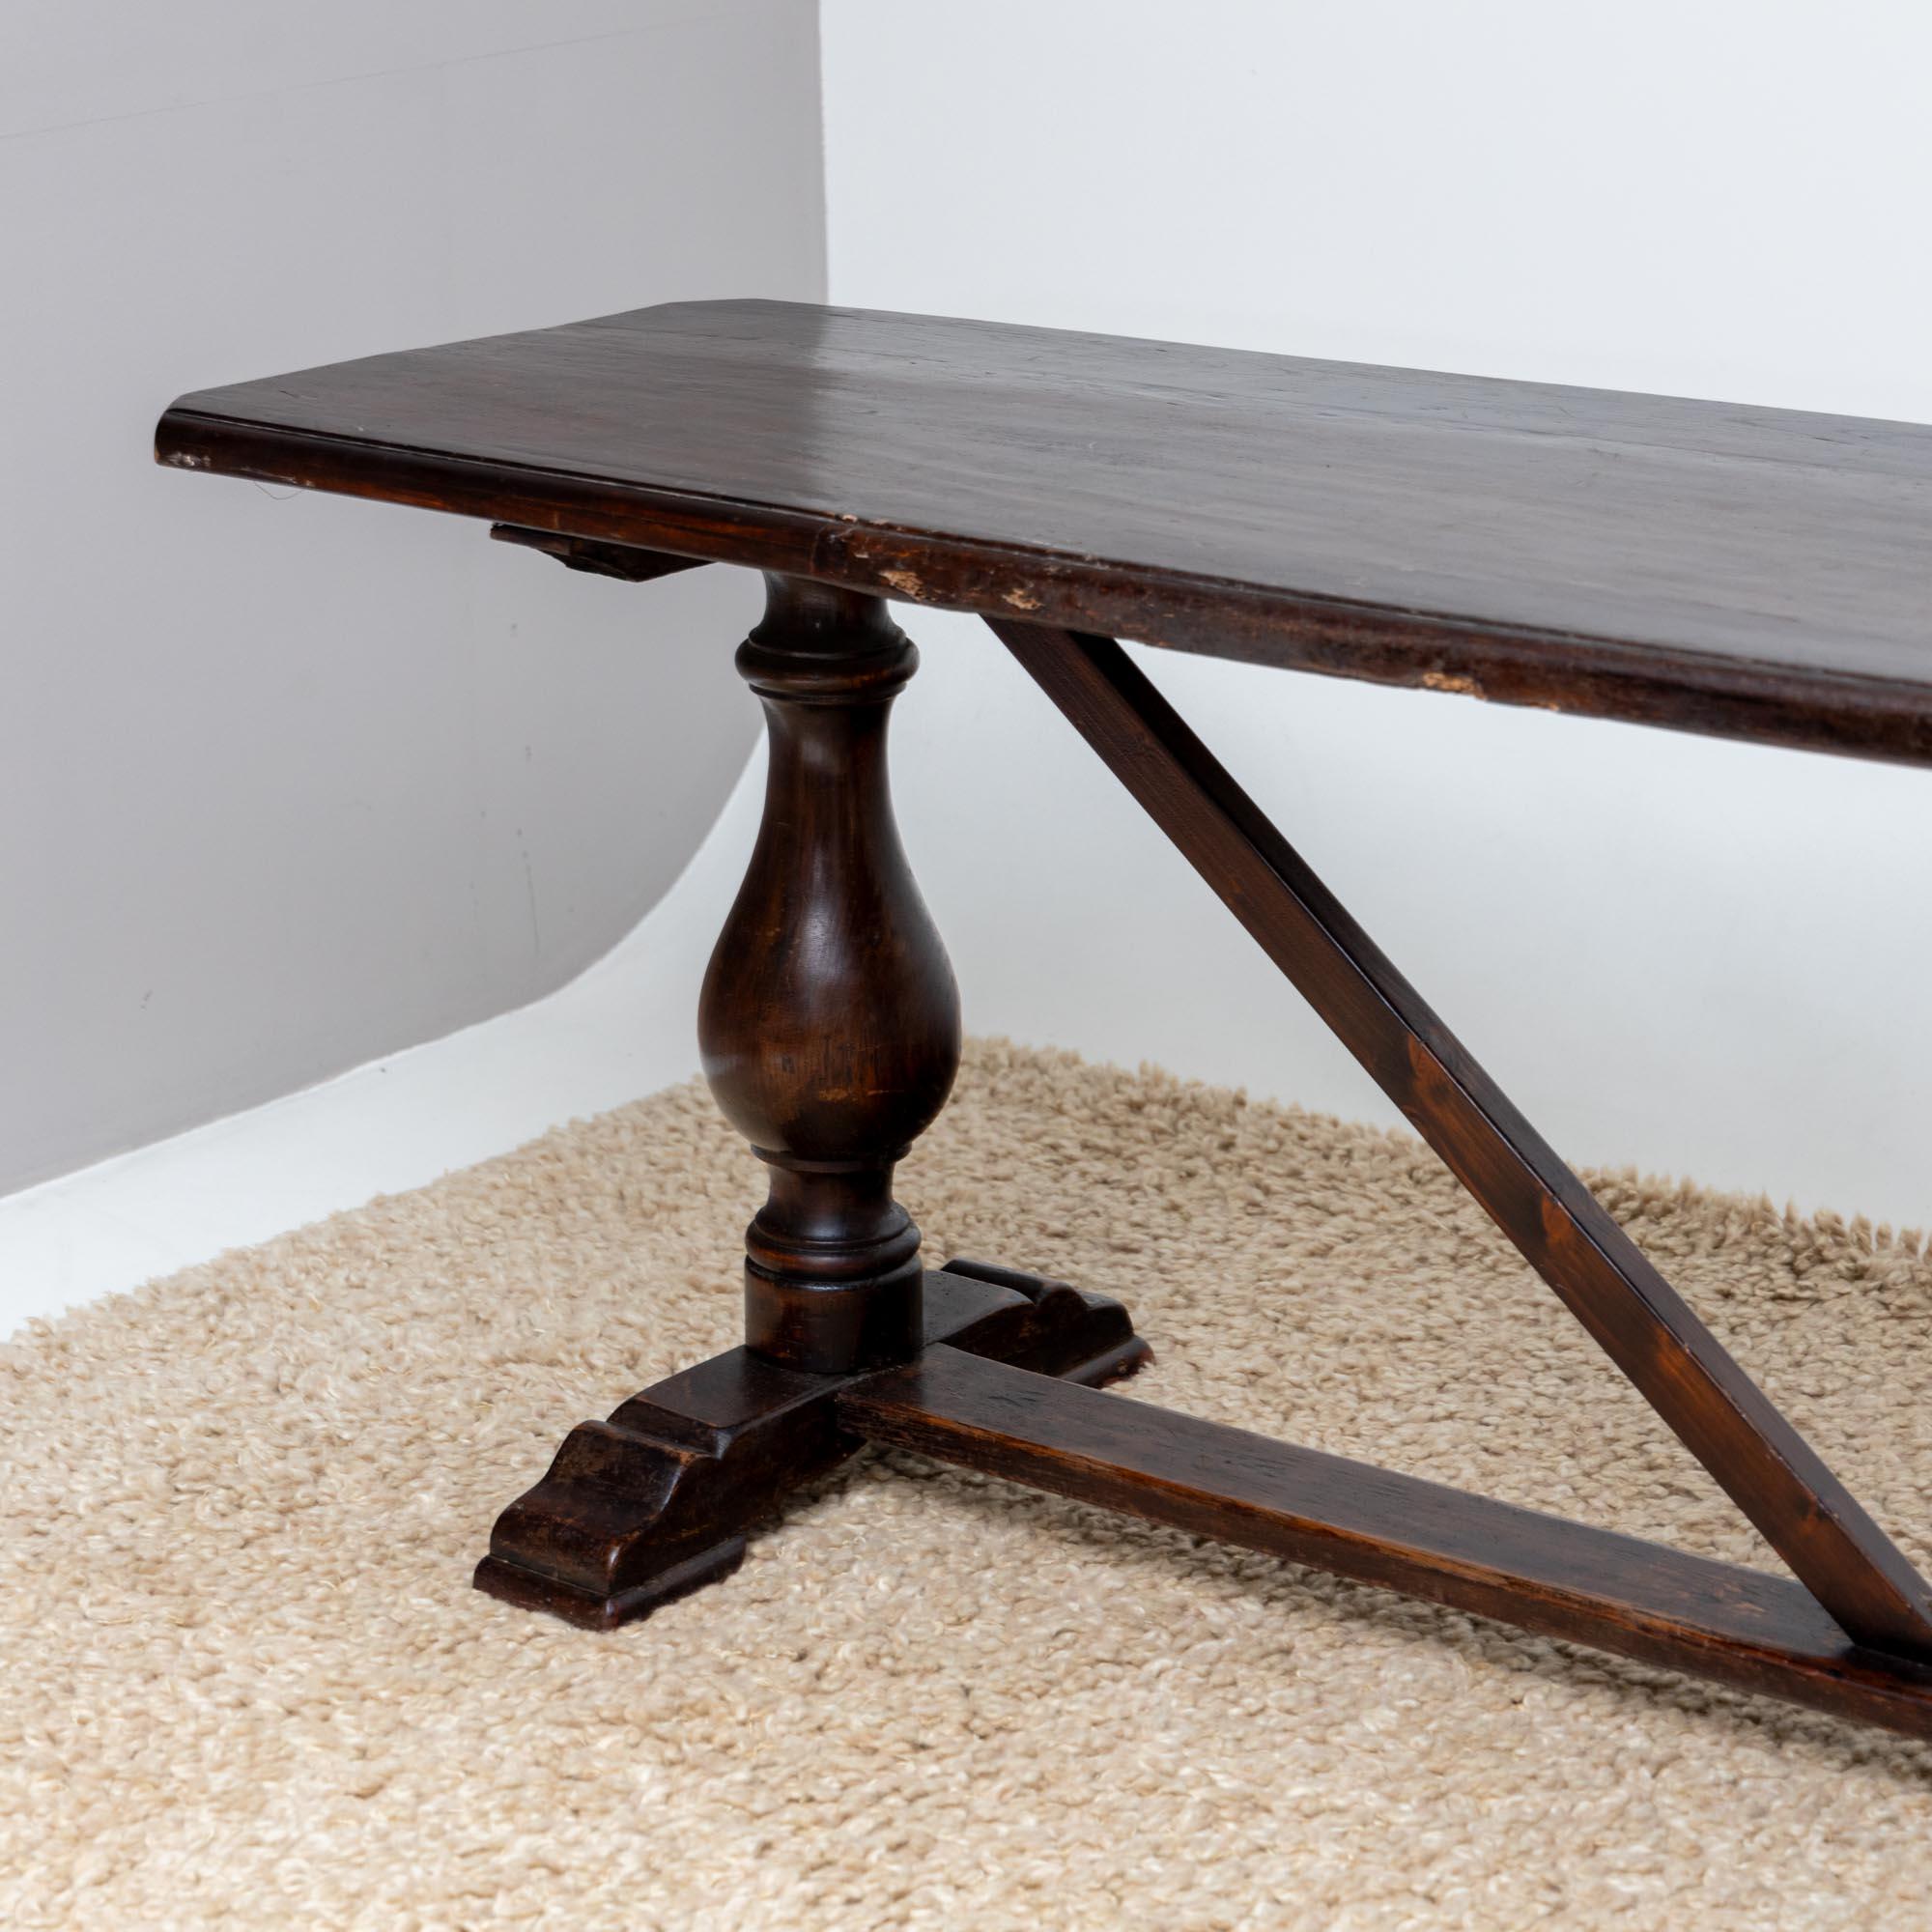 Baroque Long Provencal Dining Room Table, solid Walnut with Patina, Italy 18th Century